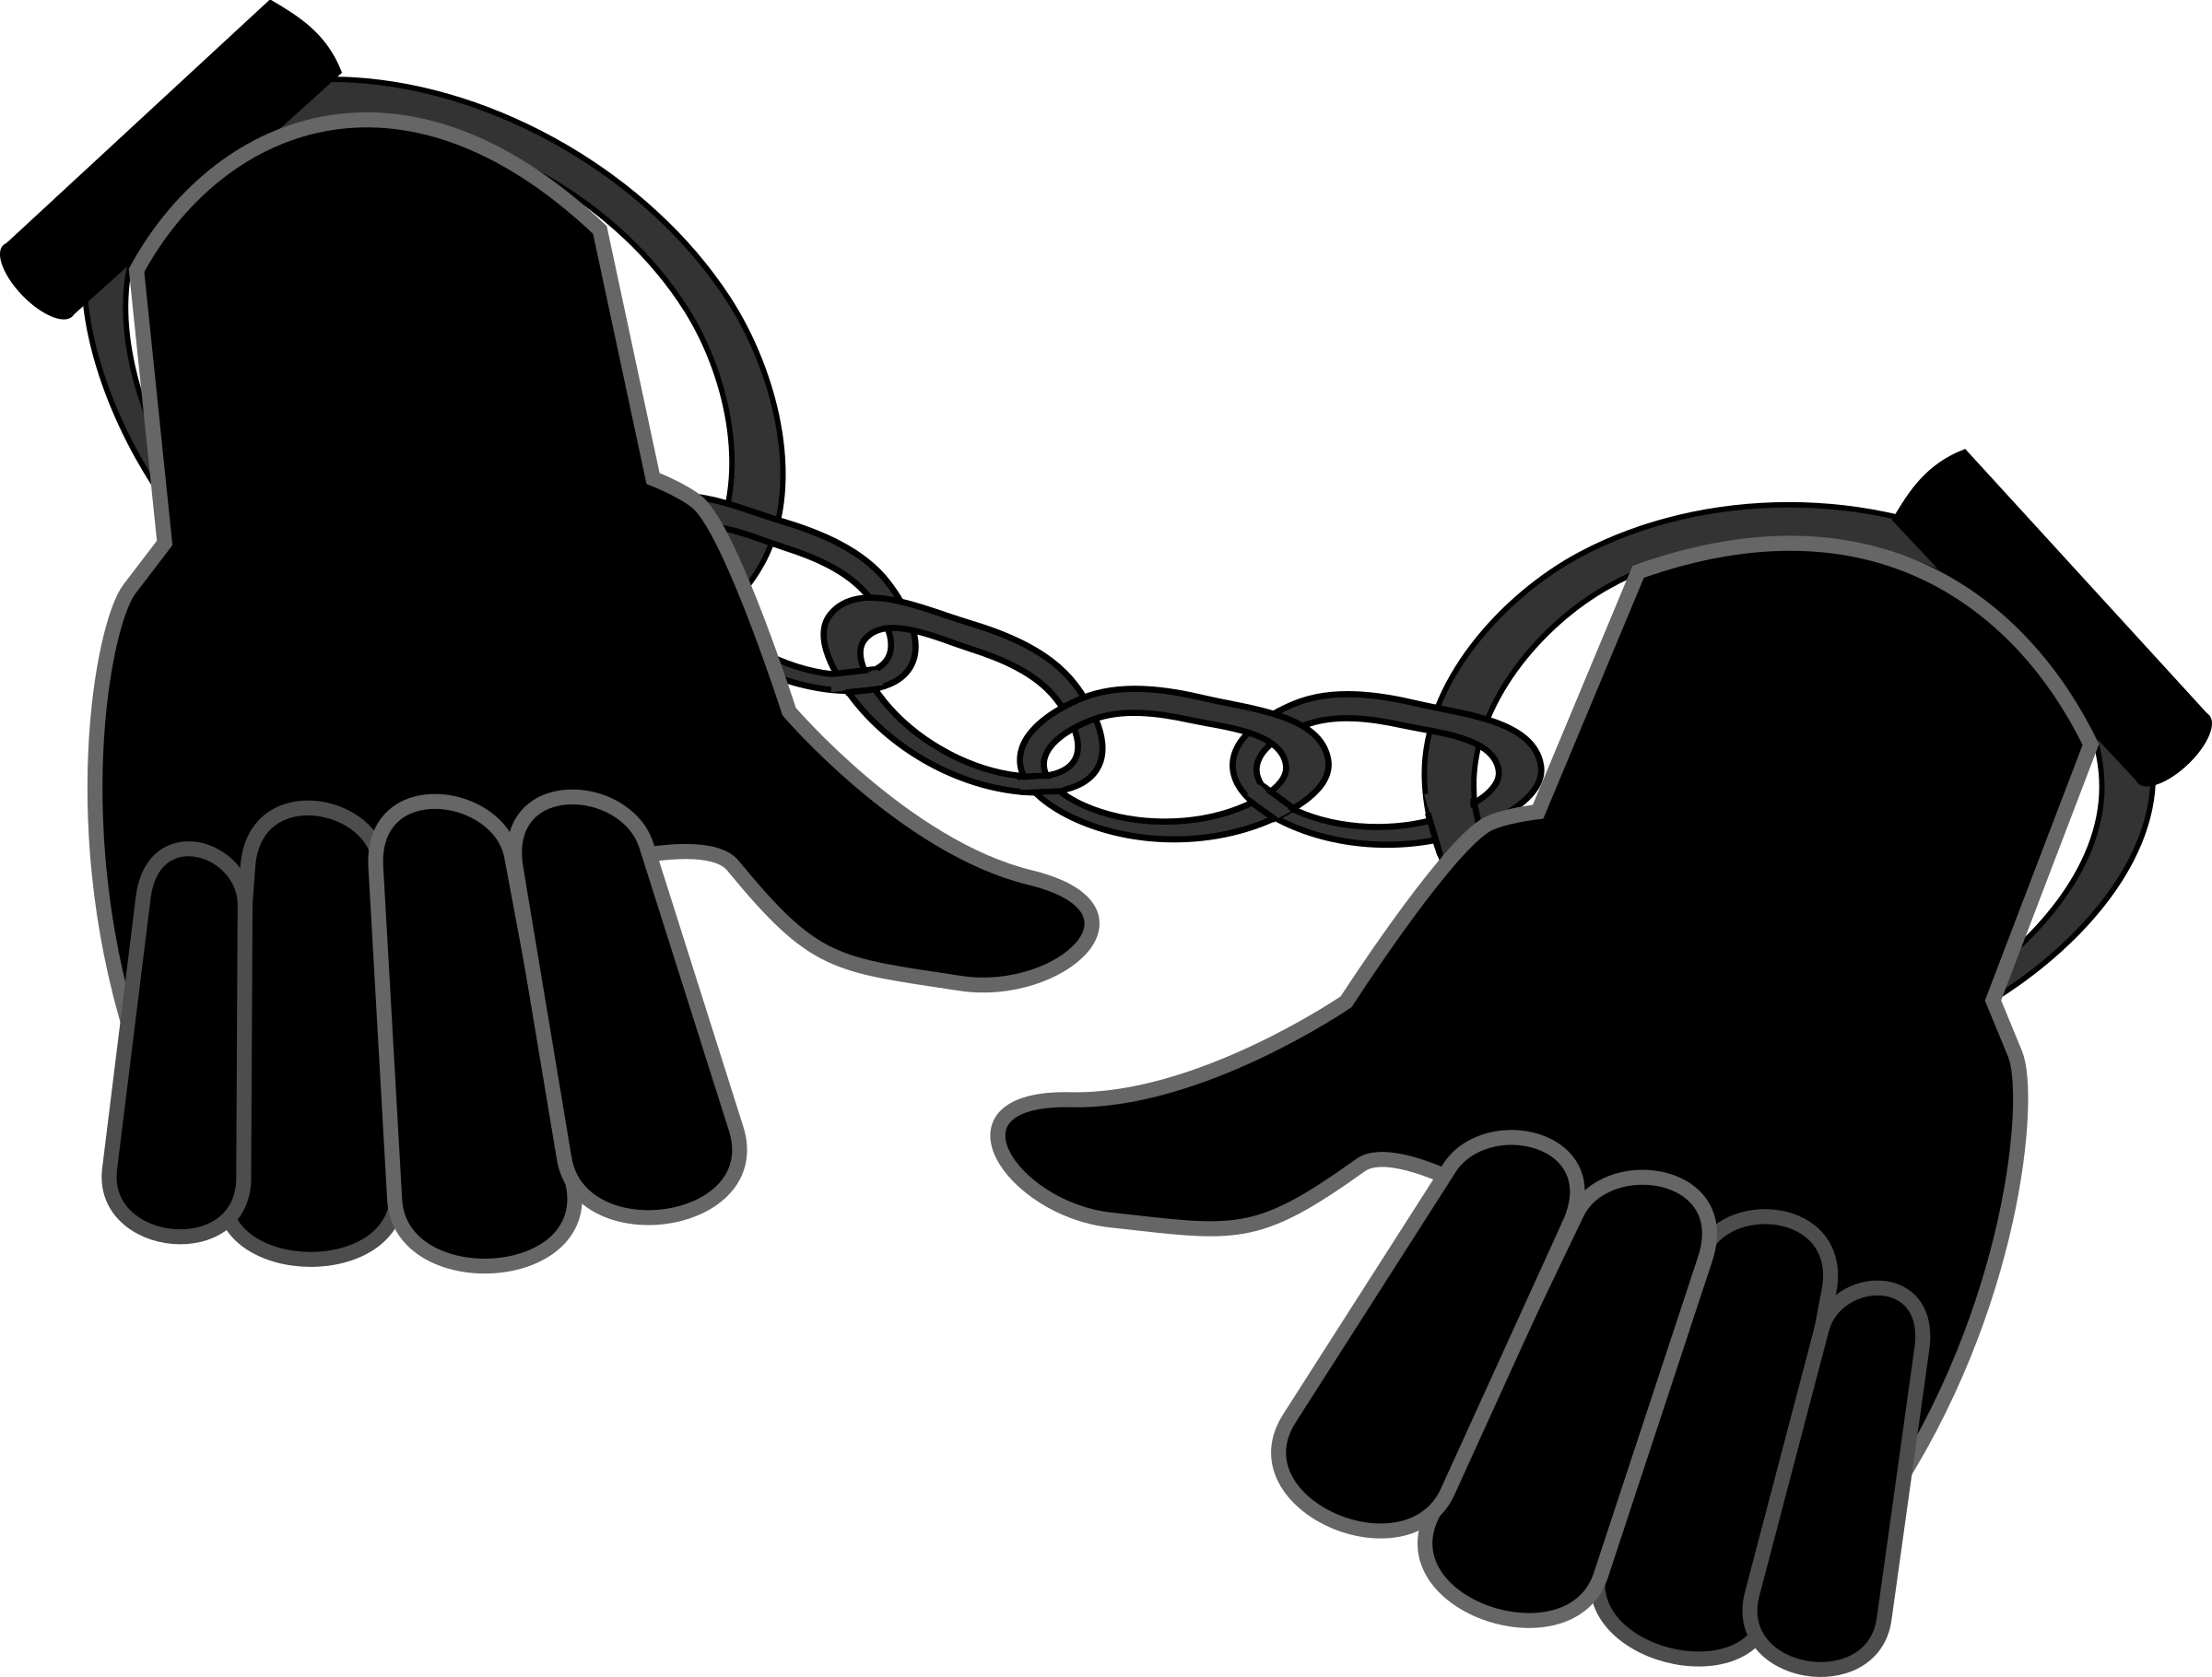 Cuffed Hands PNG - 135288